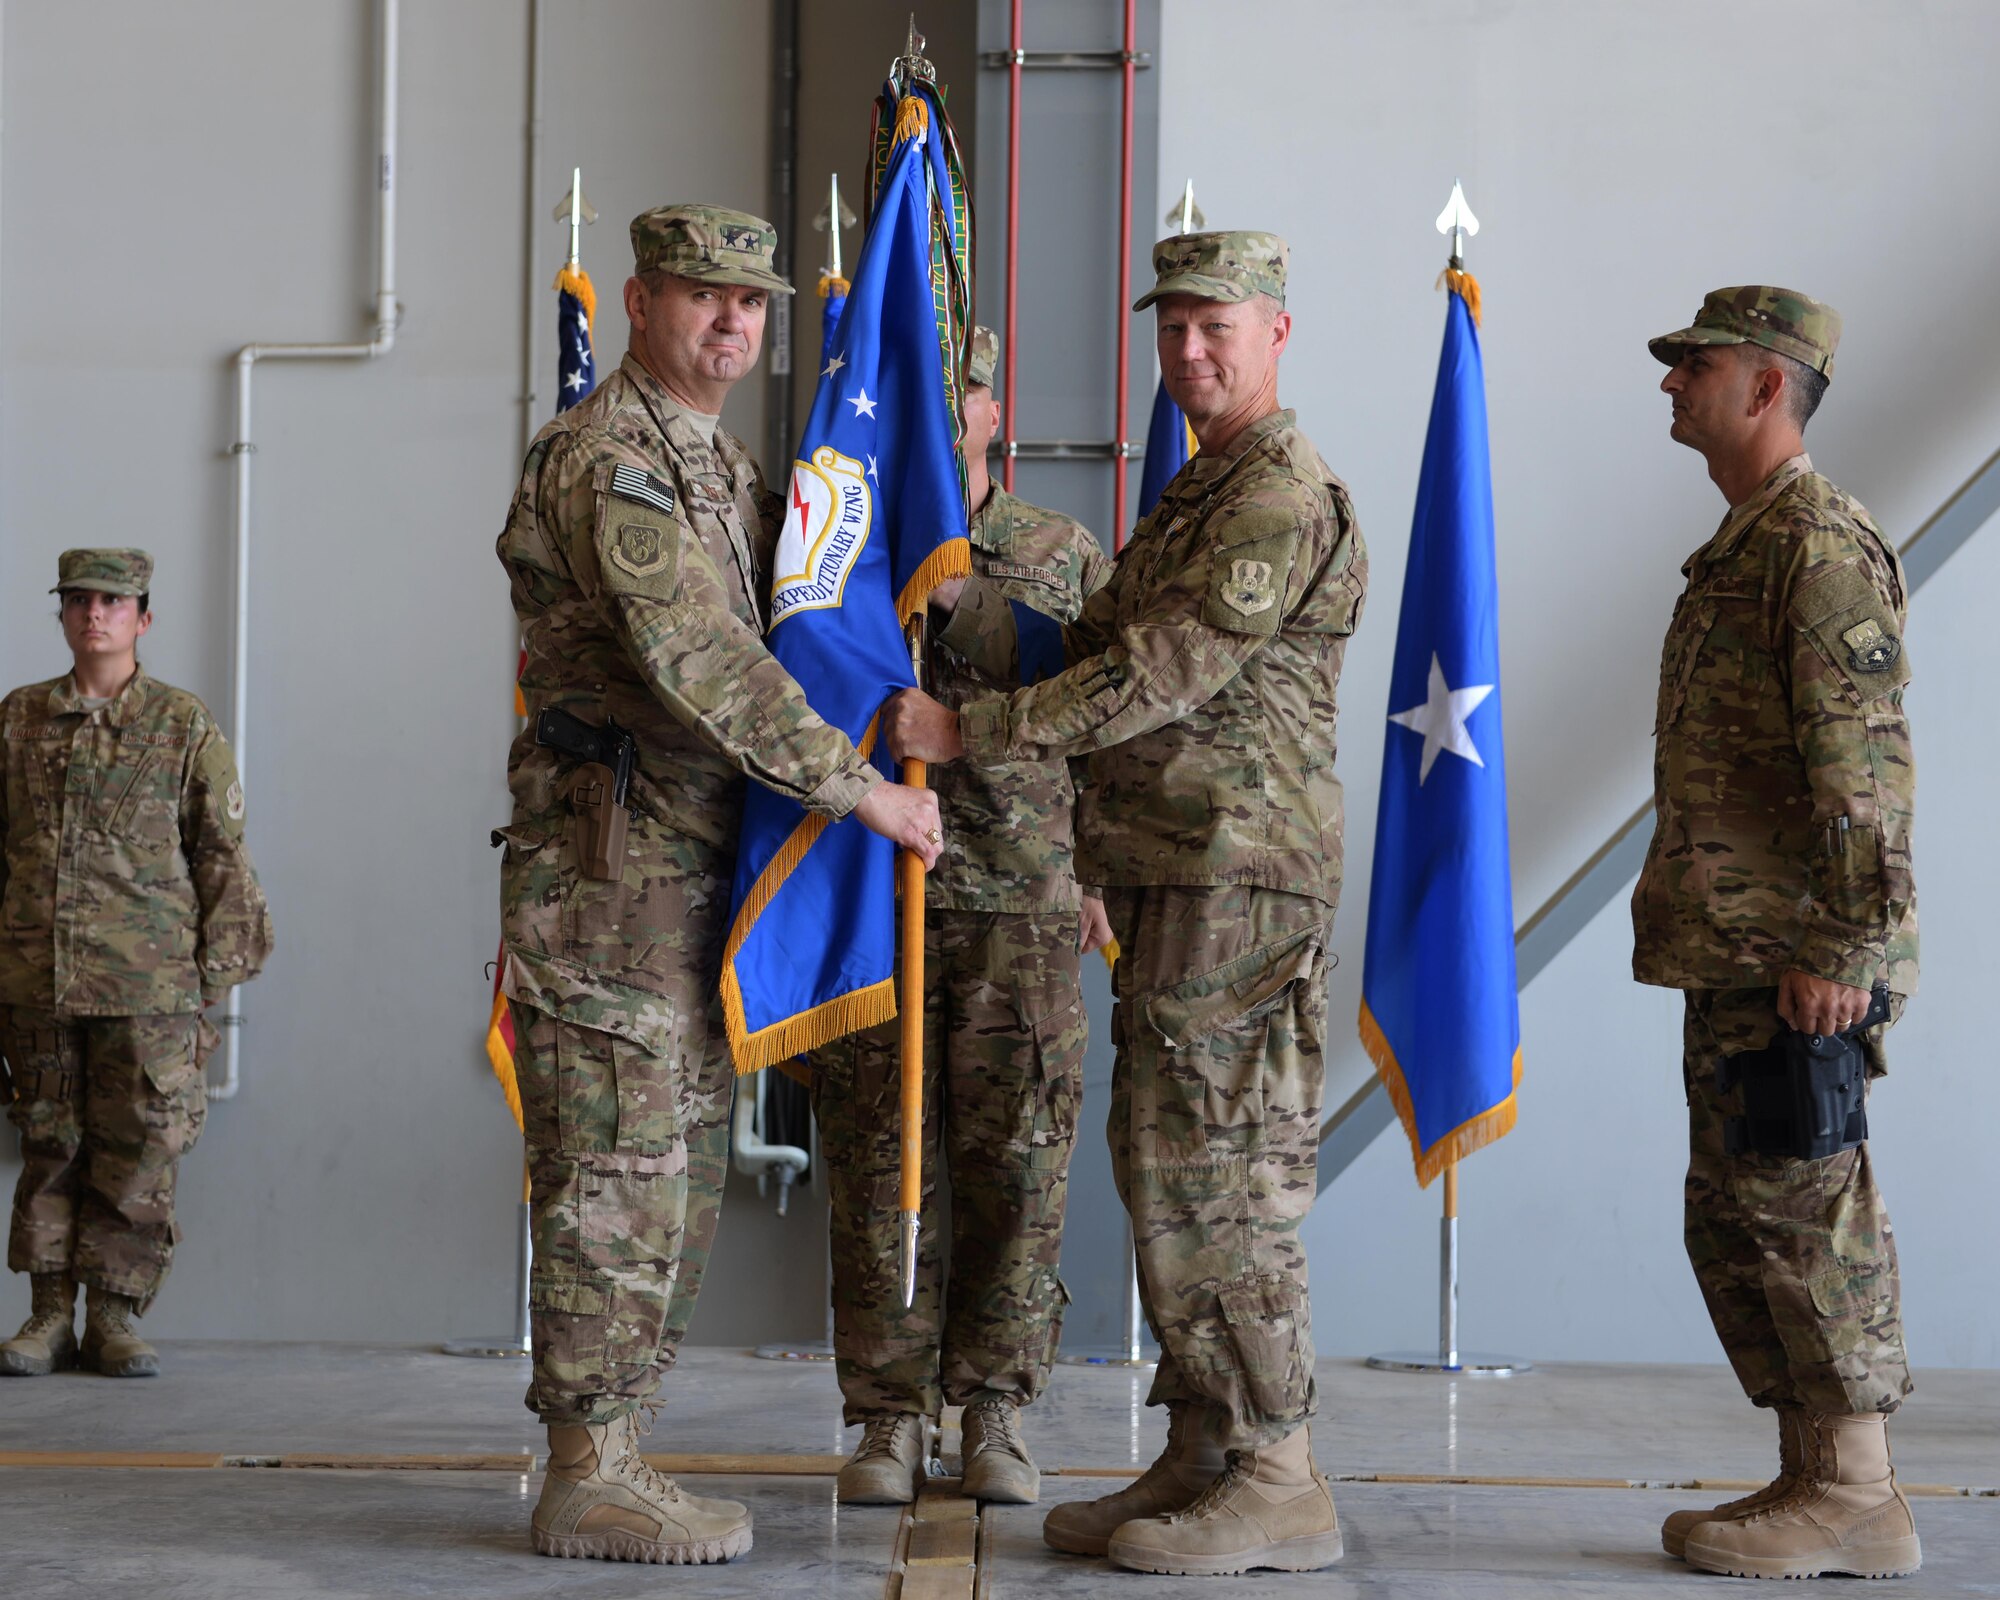 U.S. Air Force Maj. Gen. Scott West, 9th Air and Space Expeditionary Task Force-Afghanistan commander, relieves Brig. Gen. Mark Kelly from command during a change of command ceremony July 1, 2015, at Bagram Airfield, Afghanistan. Kelly relinquished command to the new commander Brig. Gen. Dave Julazadeh. (U.S. Air Force photo by Senior Airman Cierra Presentado/Released)  